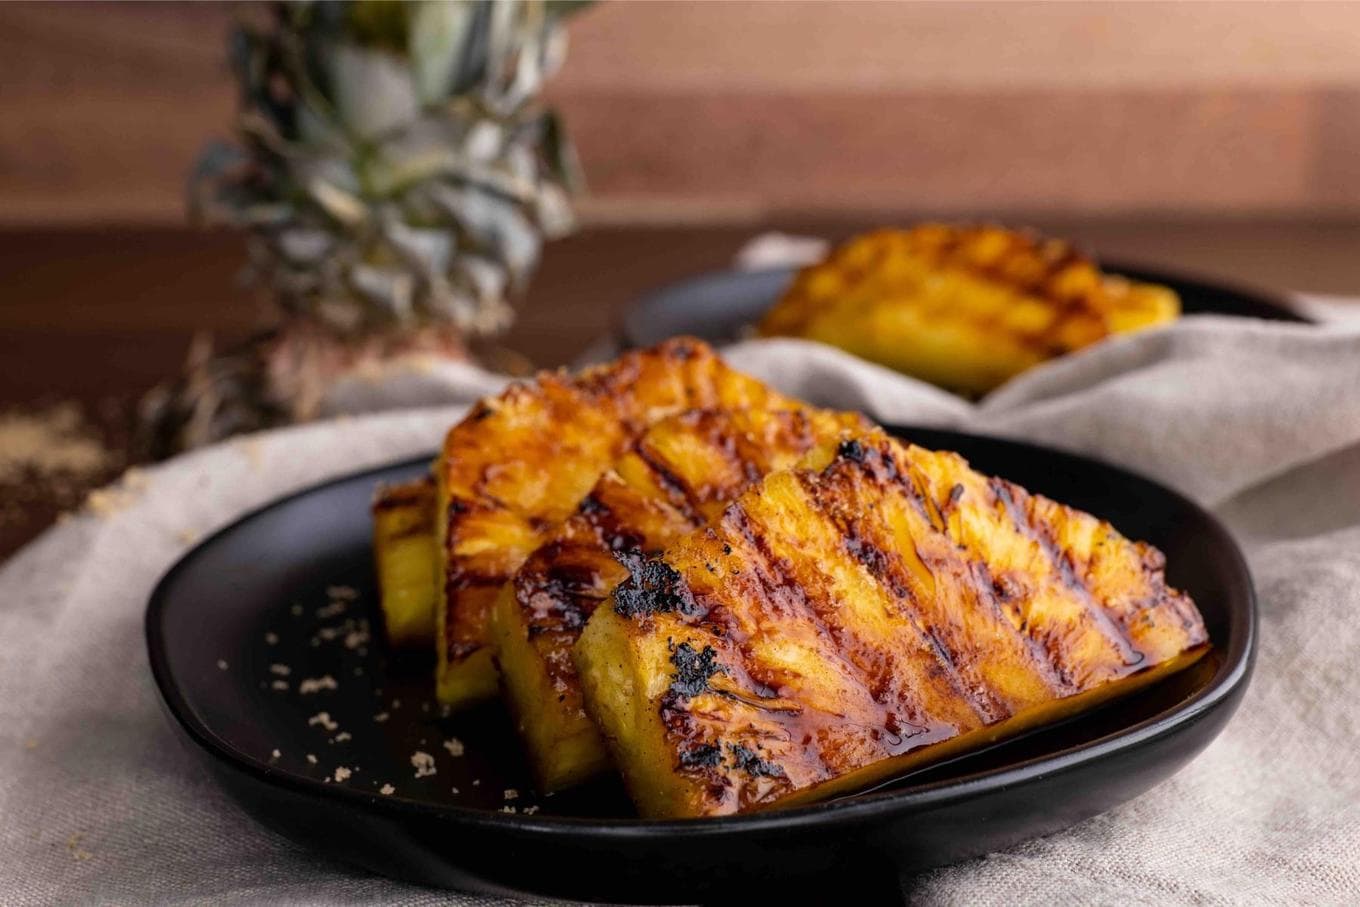 Brown Sugar Grilled Pineapple slices on plate